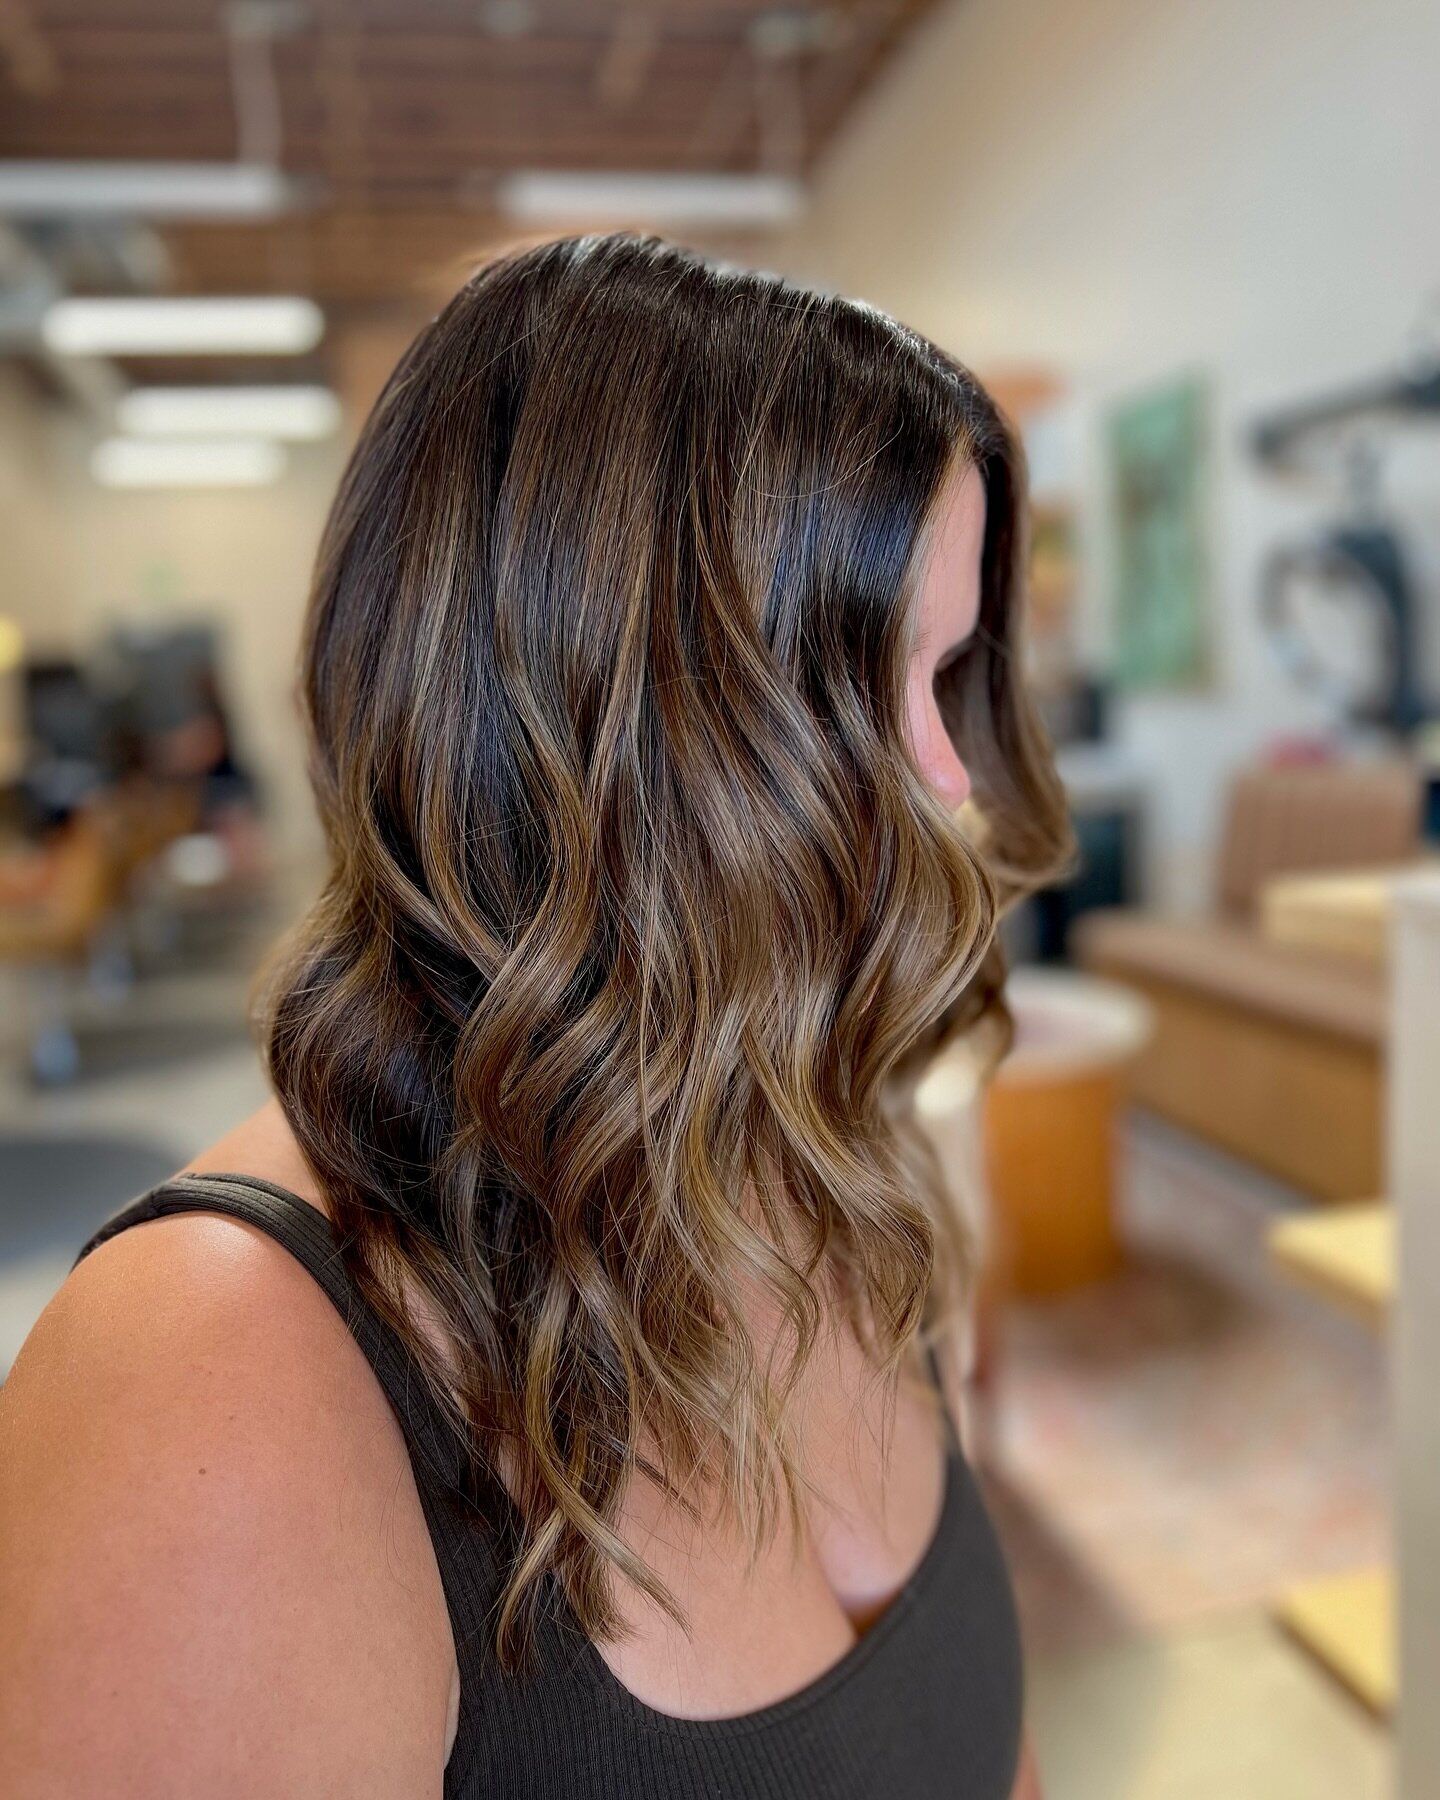 Beach waves meet sunkissed glow. ☀️ This bronze balayage is giving all the summer feels, even in the middle of winter. ❄️ &zwj;

Cut &amp; Color: @amber_lookbook 

#bronzewaves #LAHairstylist #LAHairsalon #marvista #cleanbeauty #holistic #hairinspo #